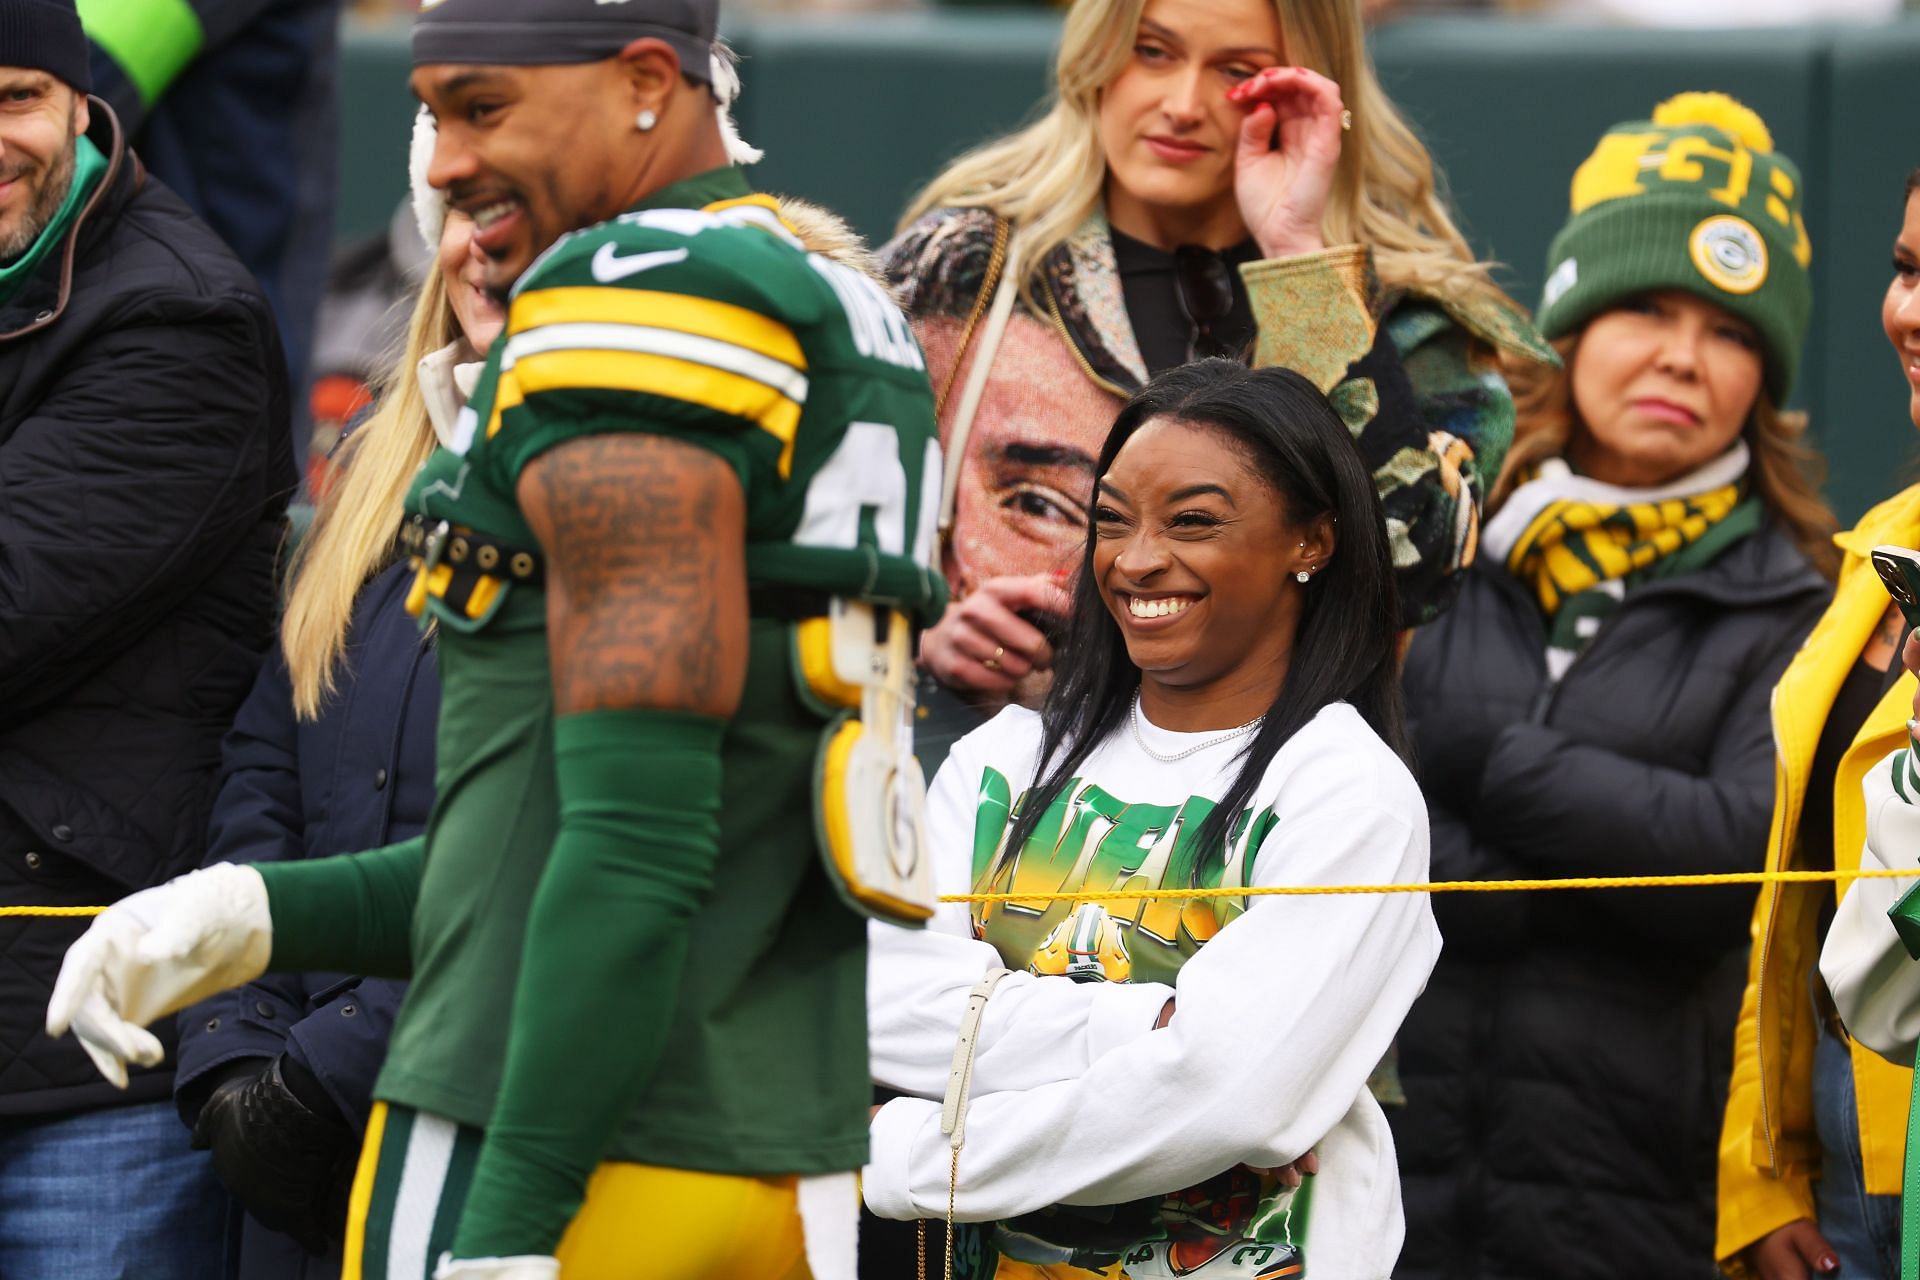 Biles looks on prior to a game between the Minnesota Vikings and the Green Bay Packers at Lambeau Field